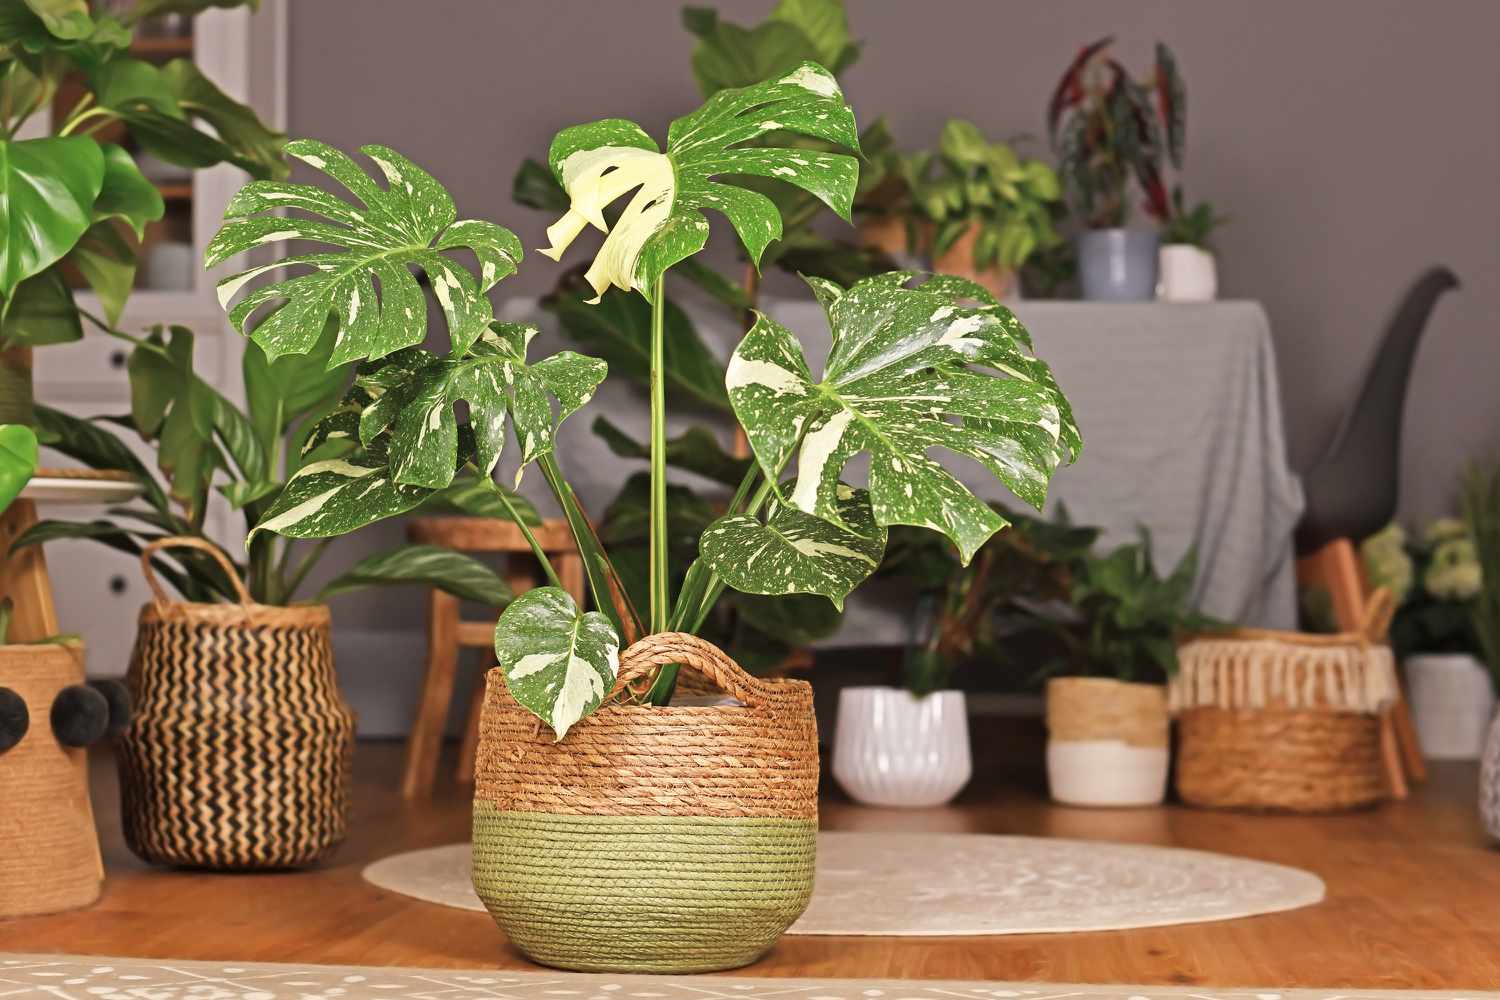 Monstera Deliciosa 'Thai Constellation' cultivar in a pot among other house plants